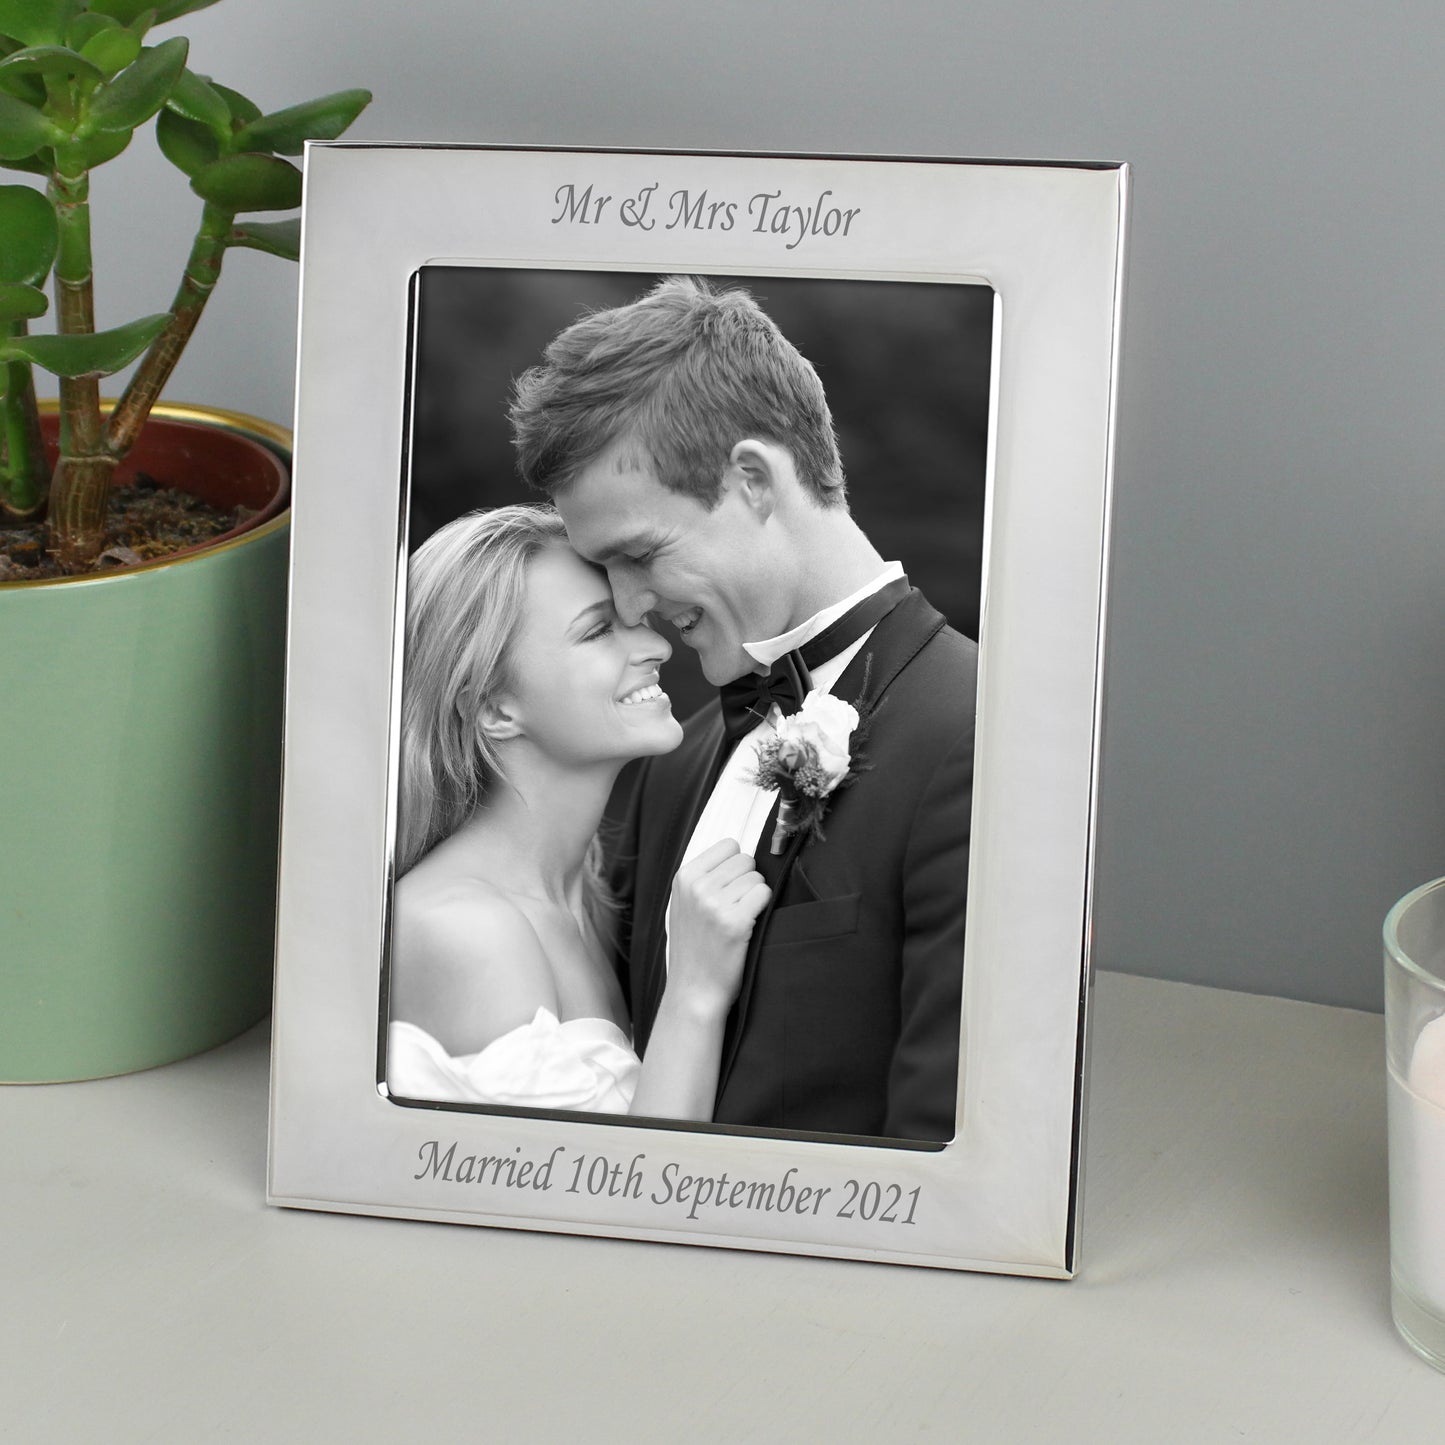 Personalised Silver Plated Frame Engraved with Any Message or Sentiment